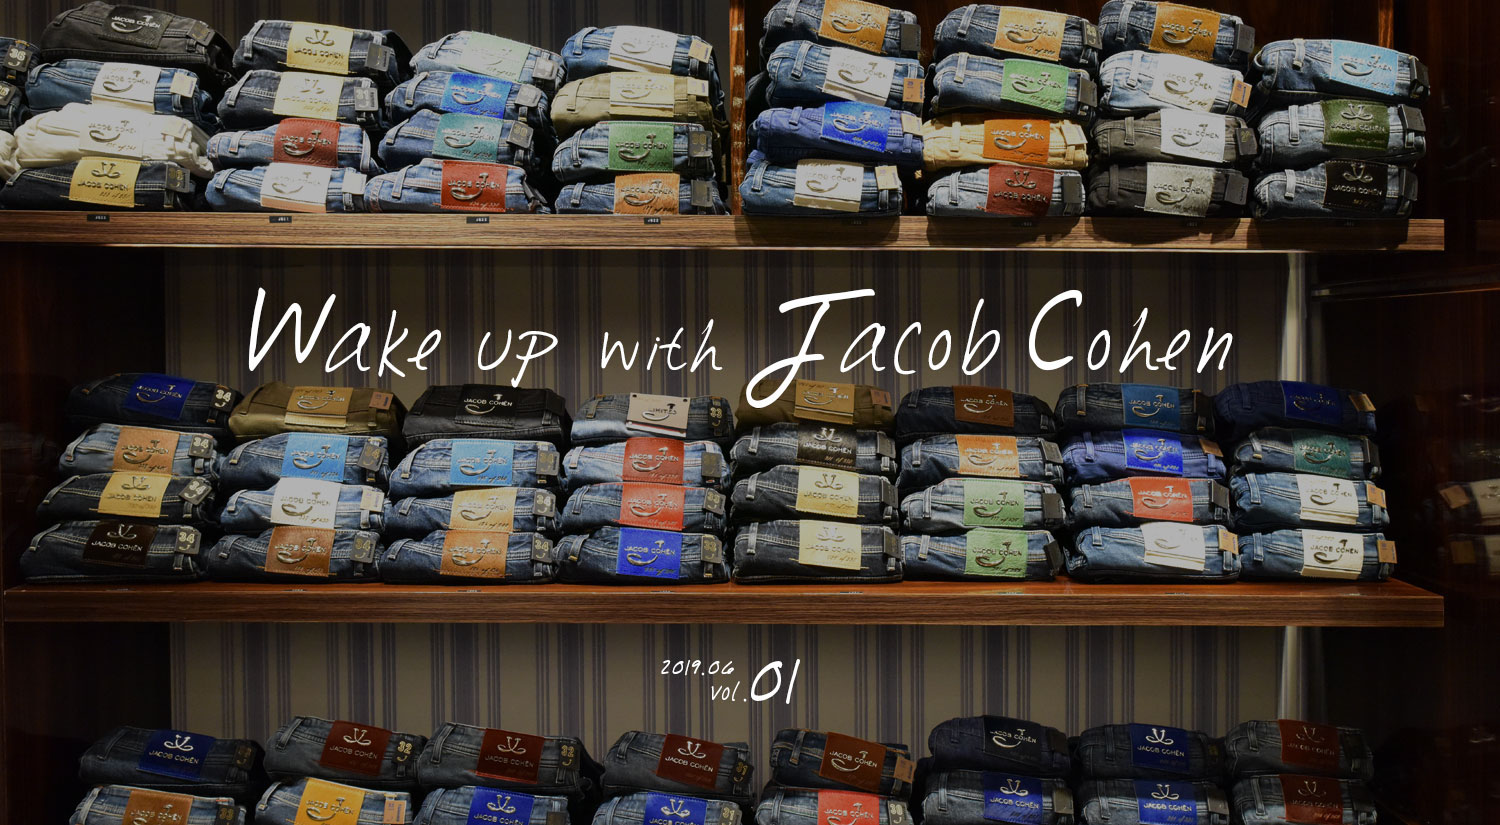 Wake up with Jacob cohen Vol.01